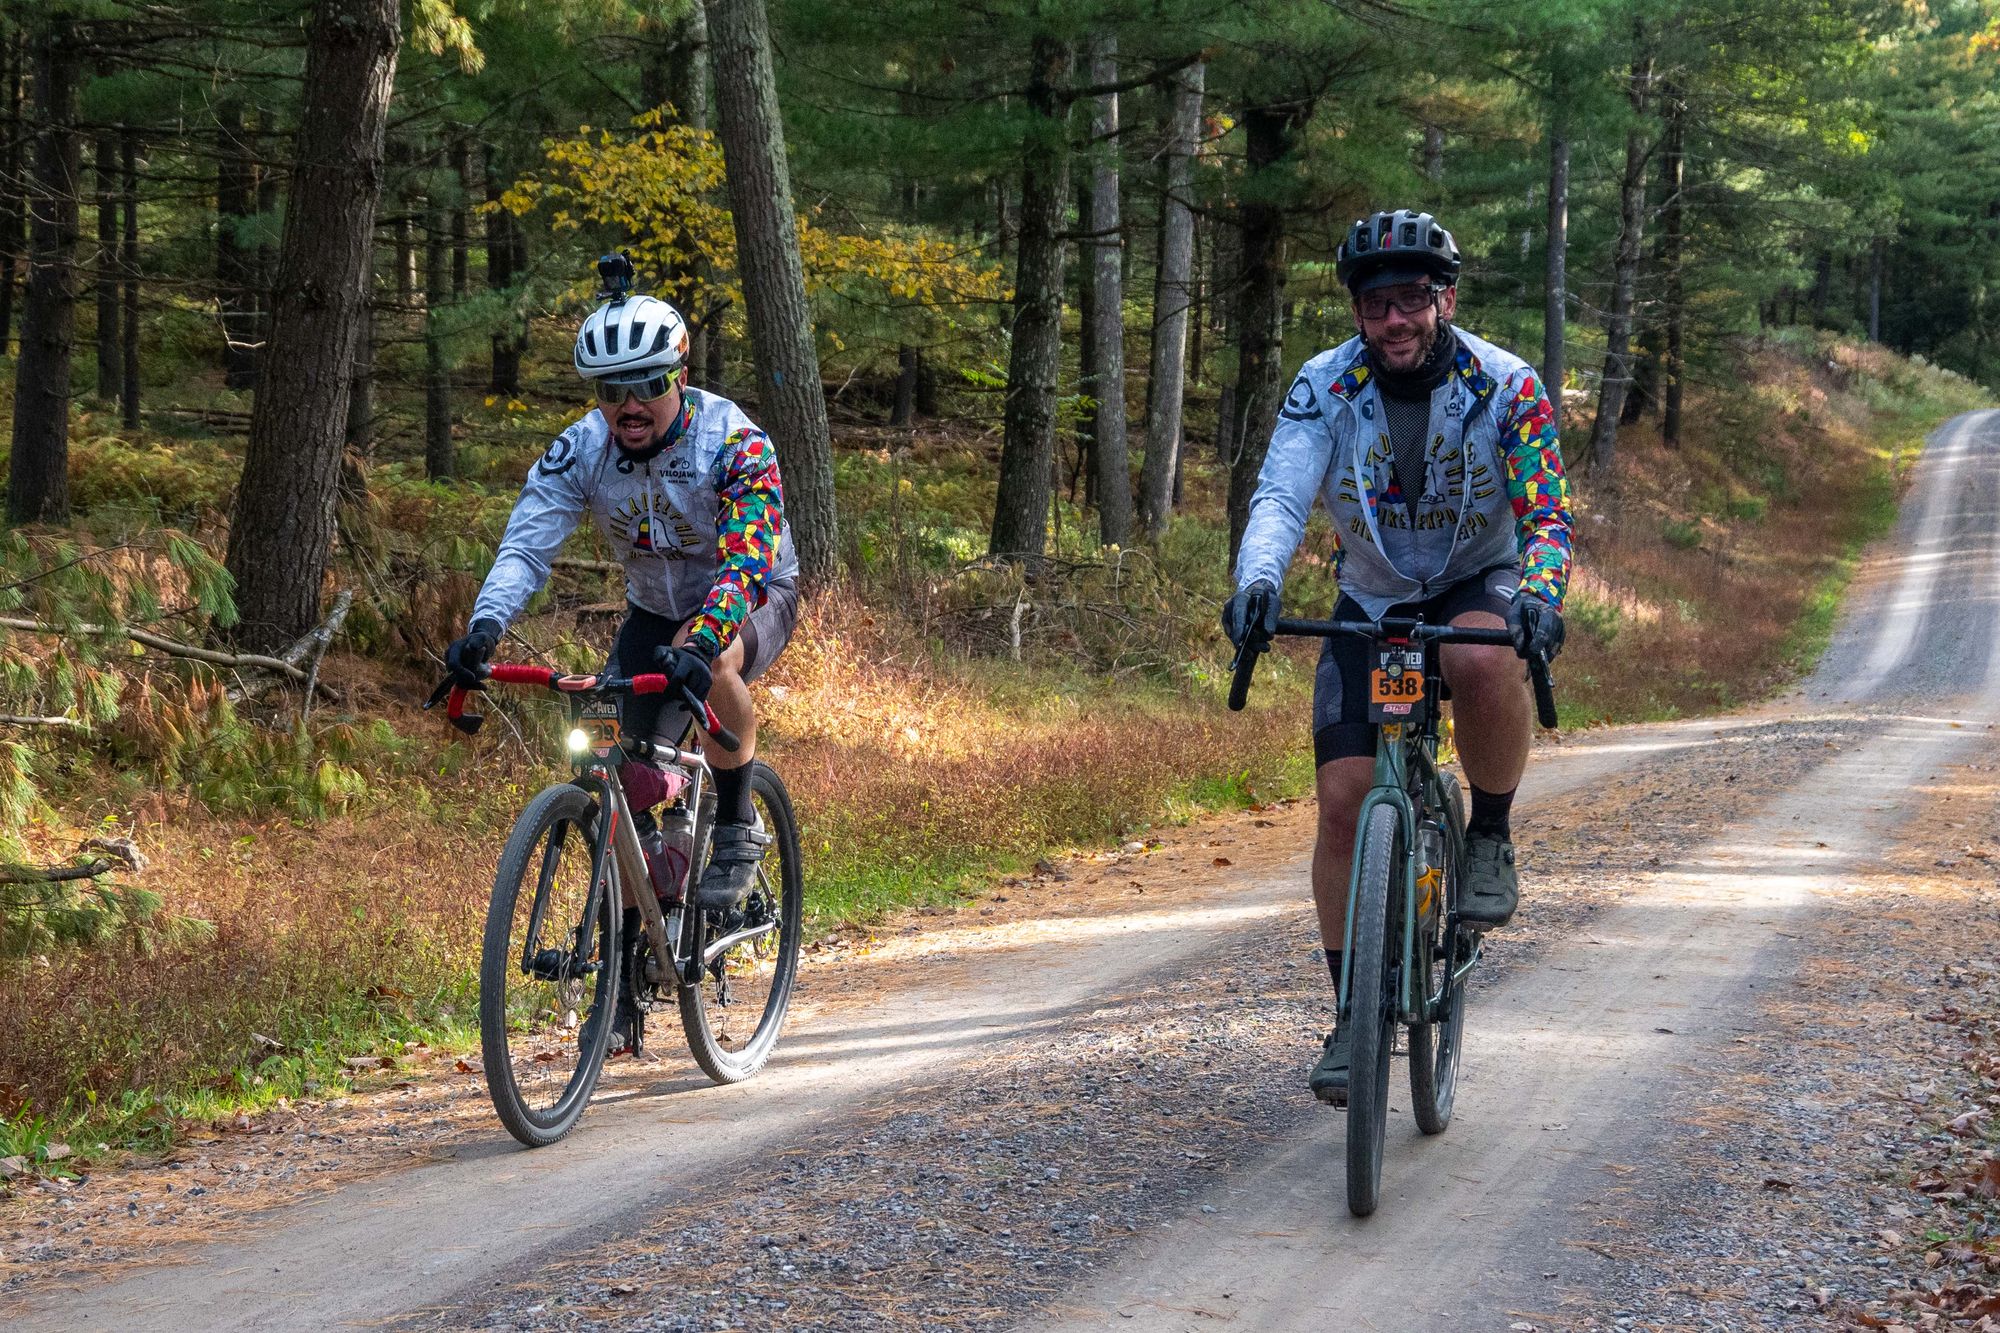 Grueling Race, Party Pace: unPAved with Philly Bike Expo